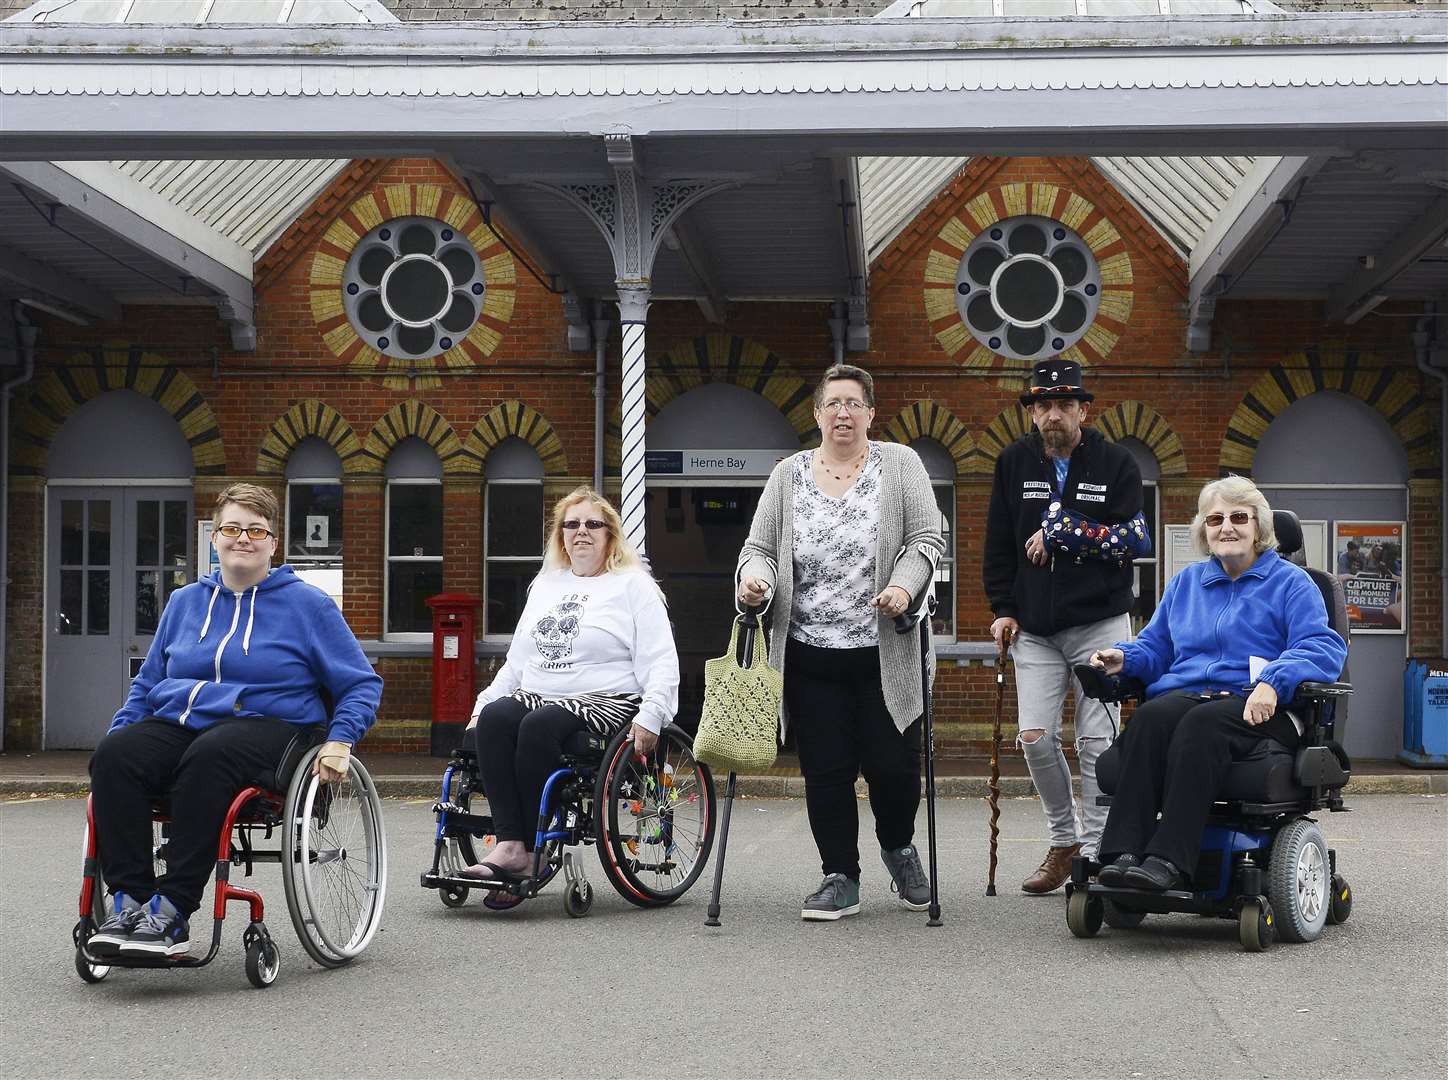 Sheila Appleton, right, is among wheelchair users who have encountered problems accessing trains at Herne Bay railway station